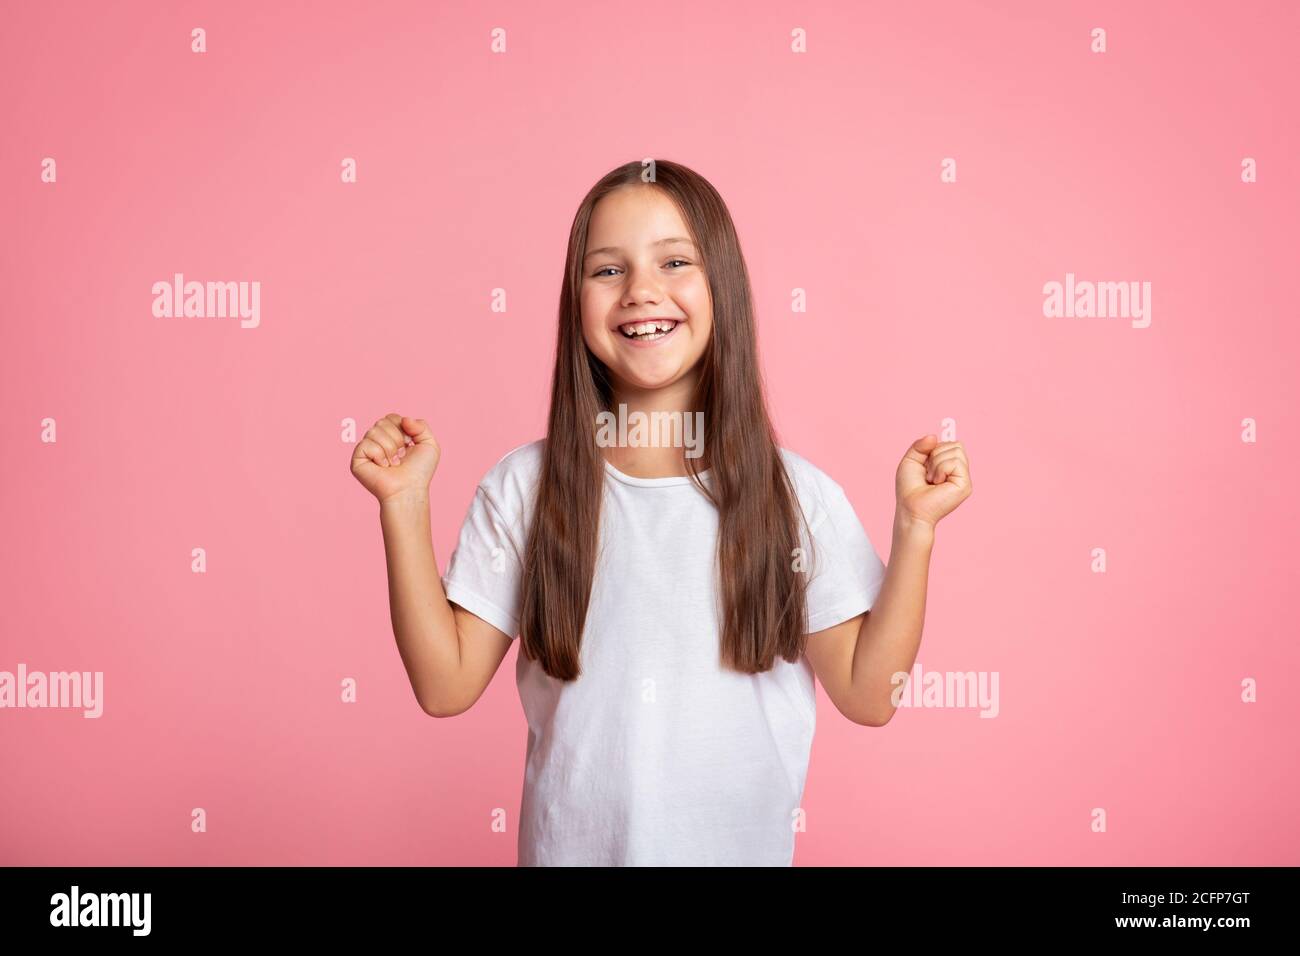 Emotions of happiness and victory. Small child expresses joy and raises her fists up Stock Photo